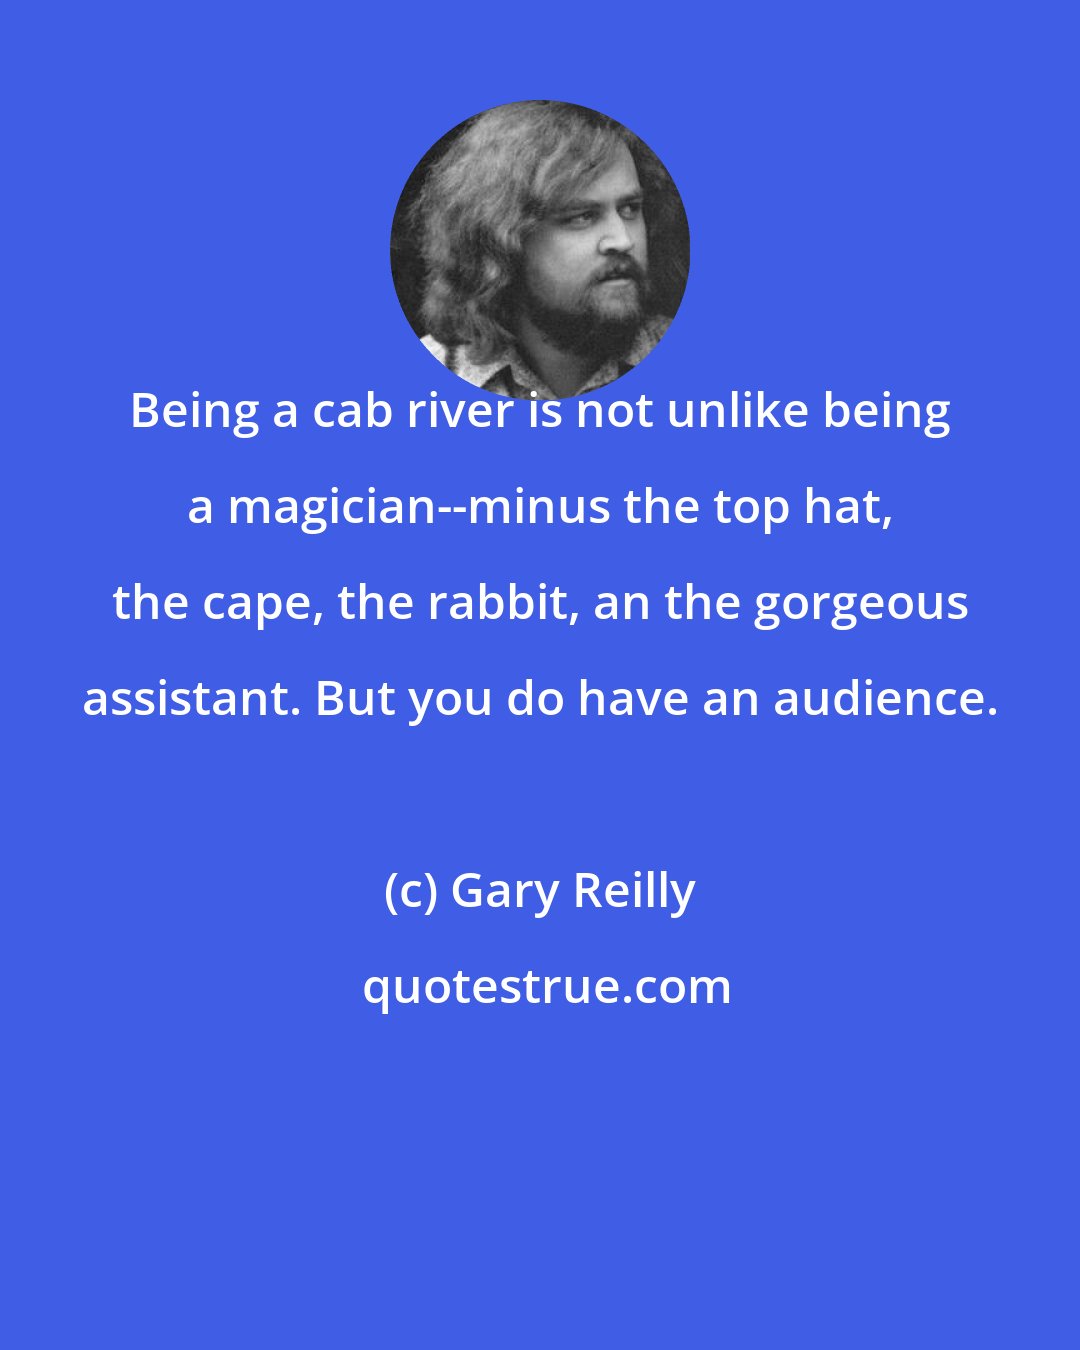 Gary Reilly: Being a cab river is not unlike being a magician--minus the top hat, the cape, the rabbit, an the gorgeous assistant. But you do have an audience.